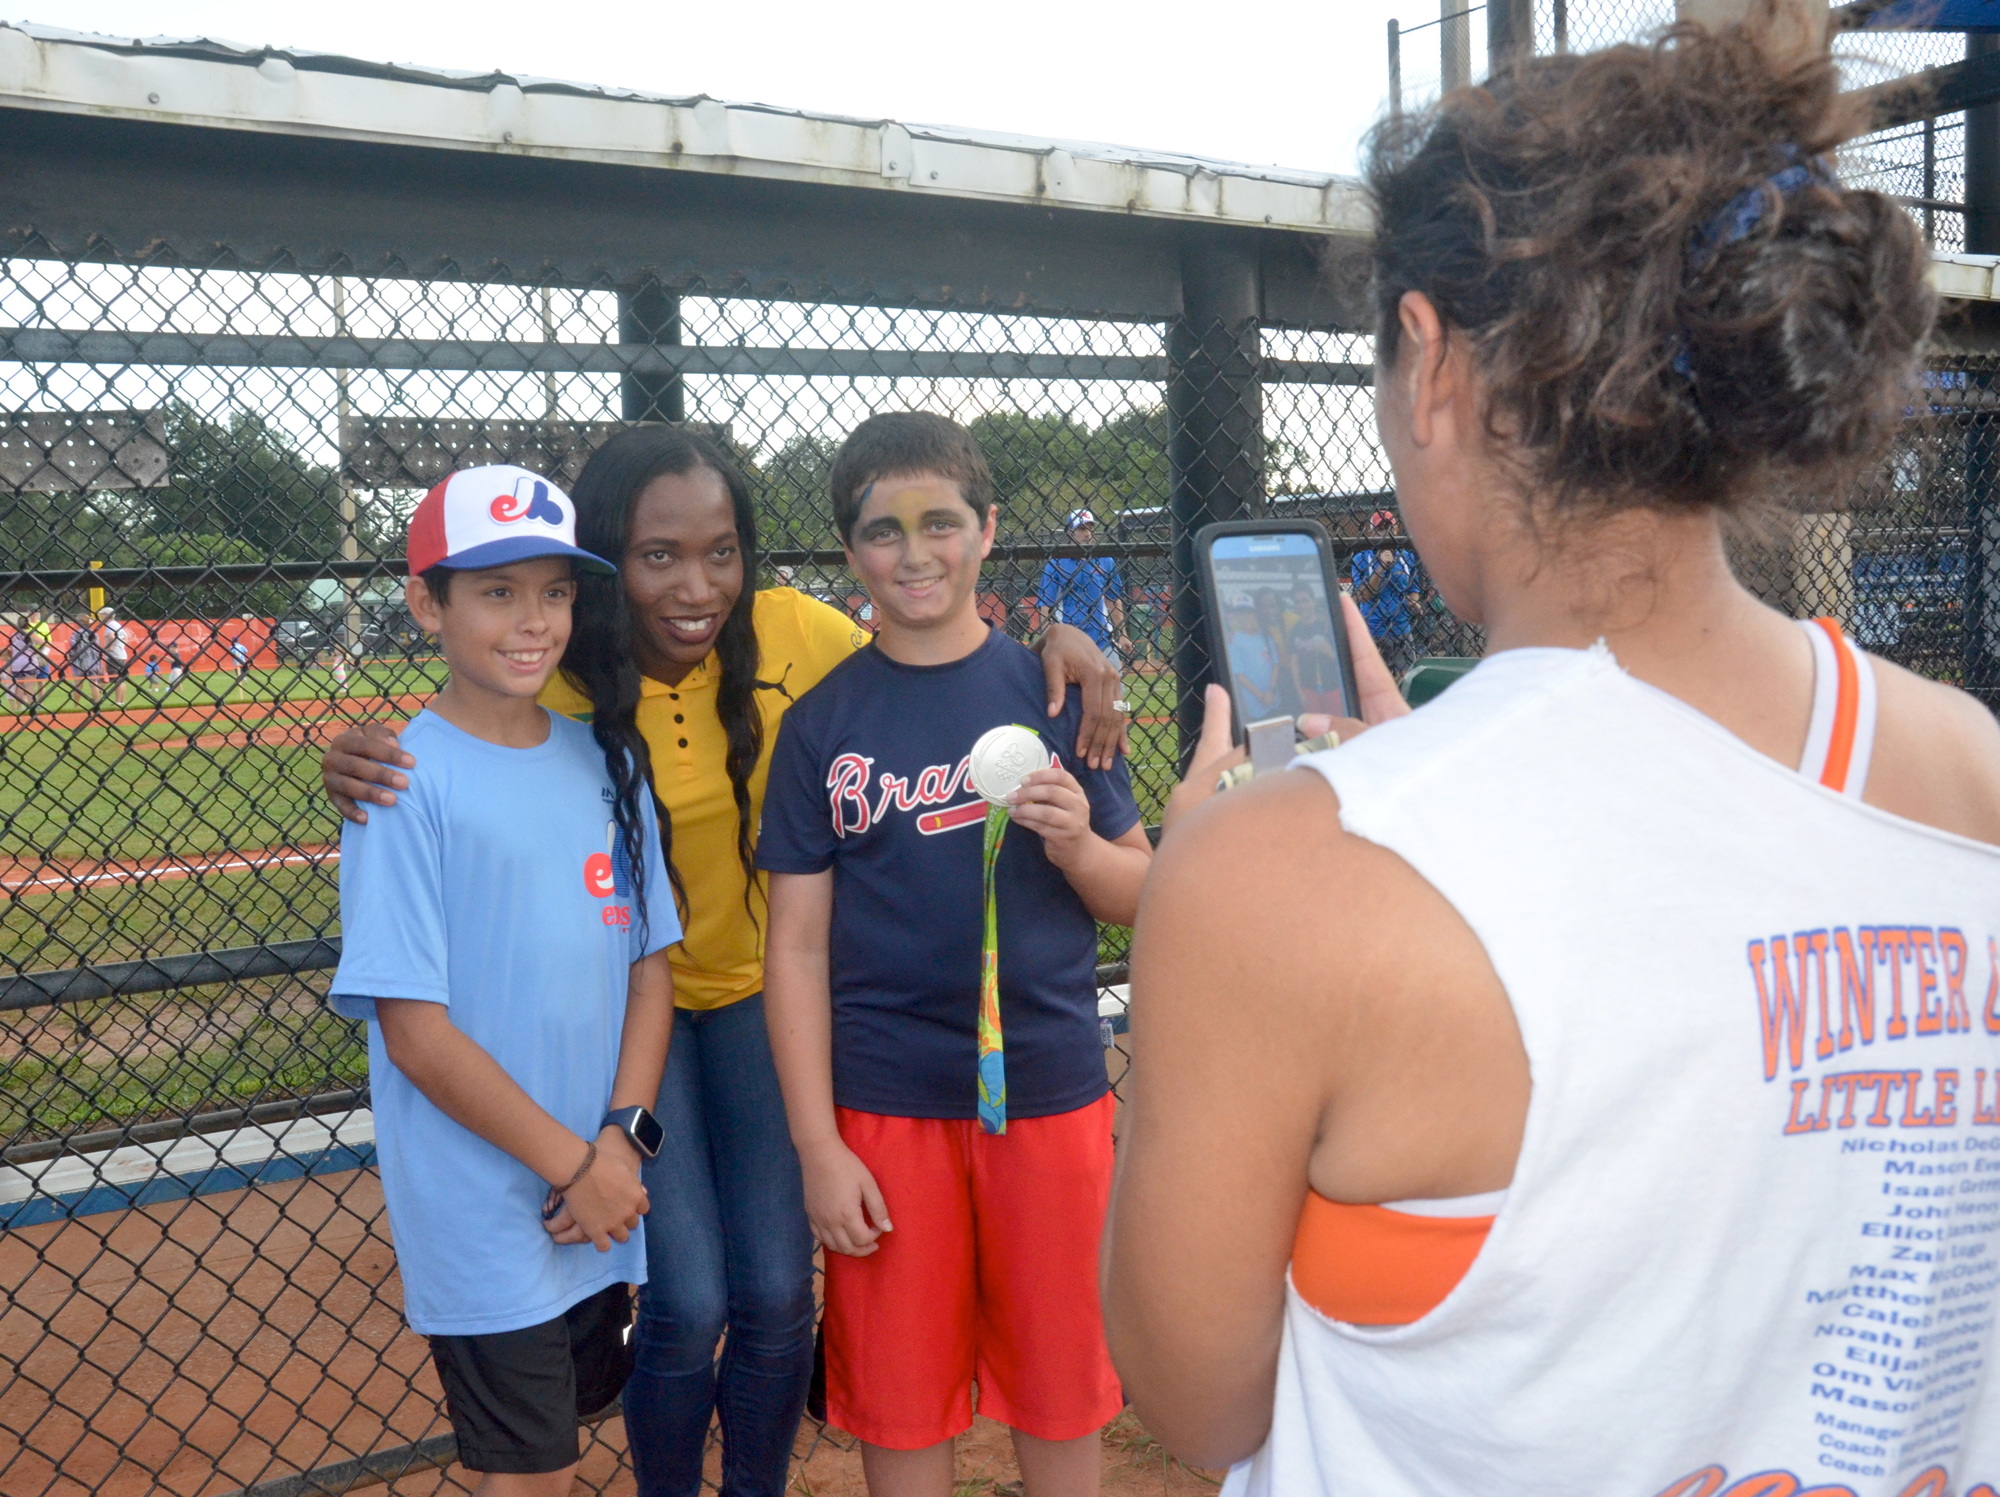 Little Leaguers from Winter Garden took advantage of the opportunity to meet an Olympic medalist when Novlene Williams-Mills stopped by the opening ceremonies to throw out the first pitch.